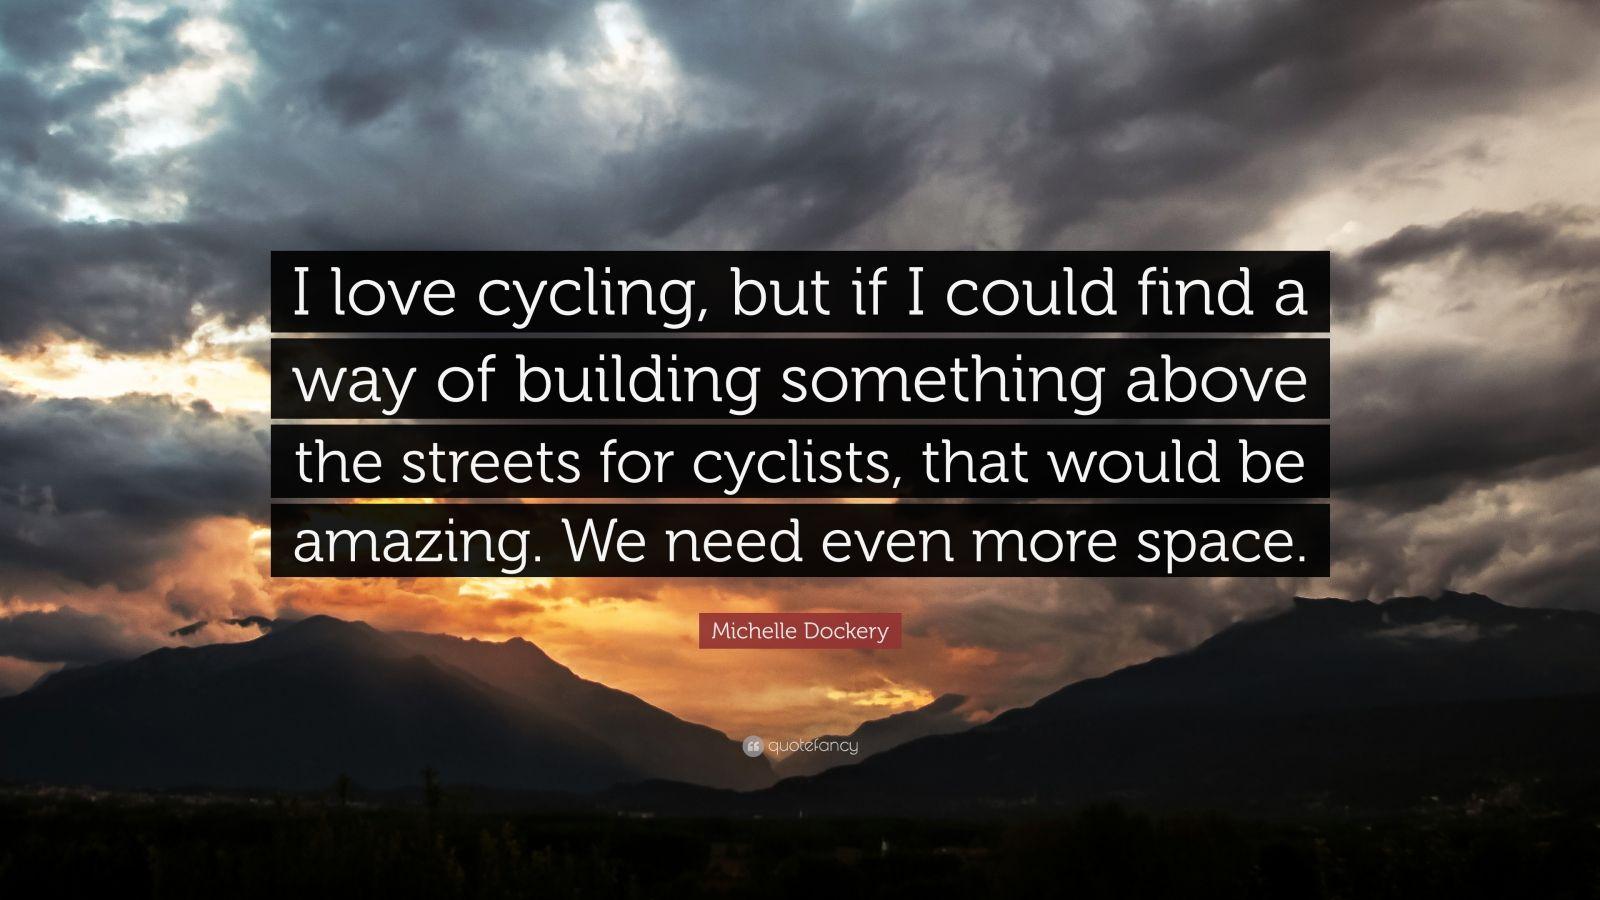 Michelle Dockery Quote: “I love cycling, but if I could find a way